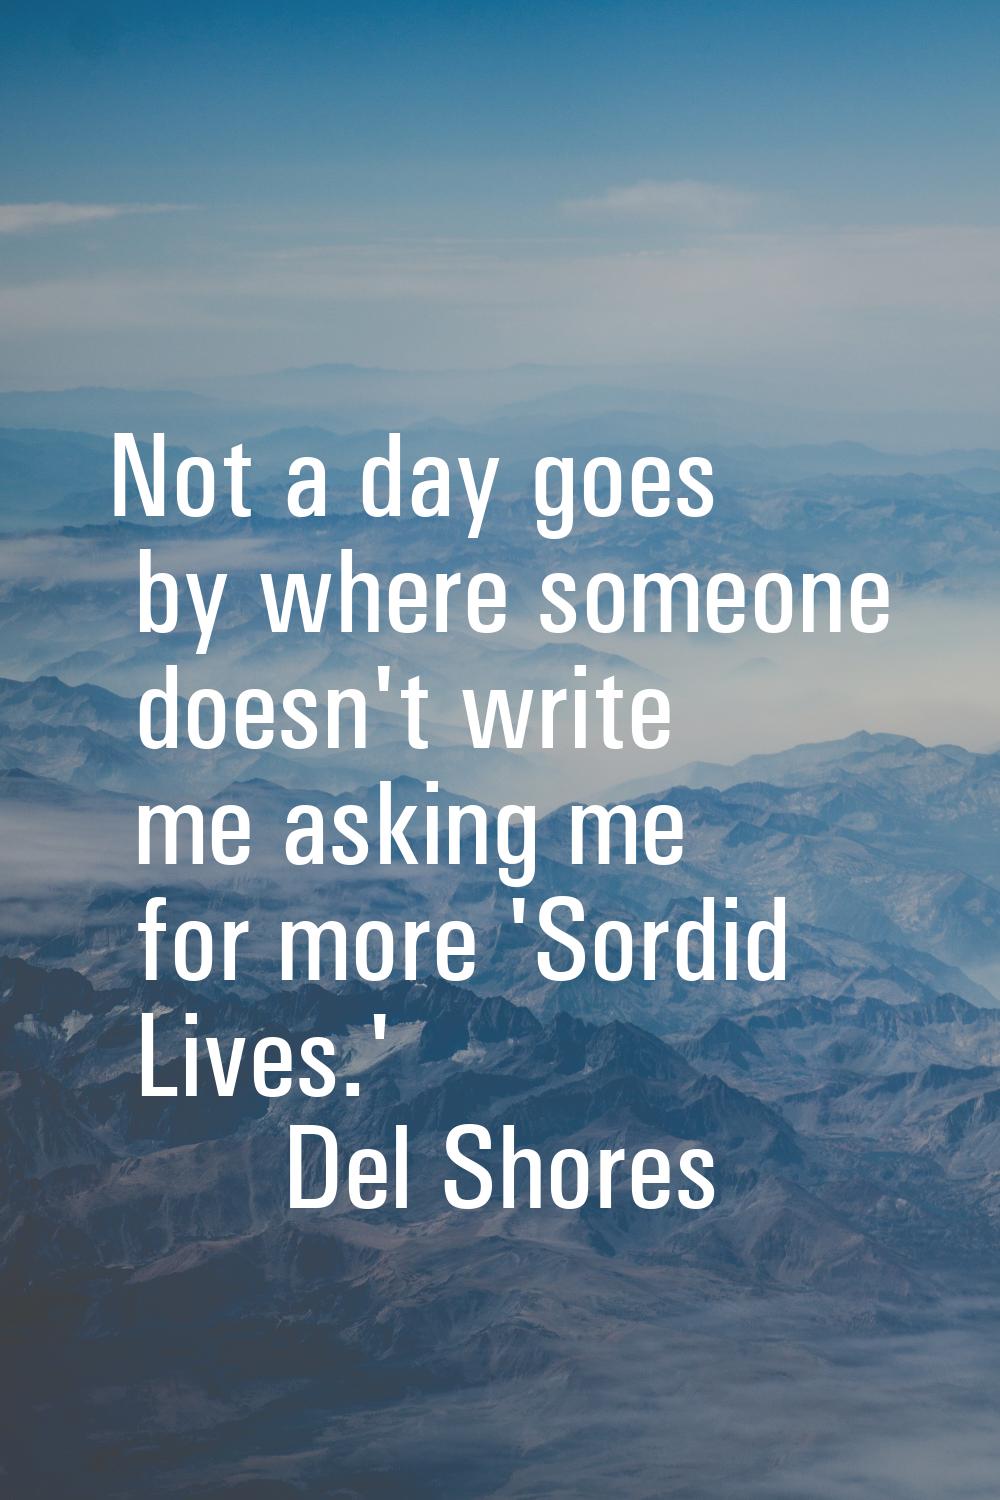 Not a day goes by where someone doesn't write me asking me for more 'Sordid Lives.'